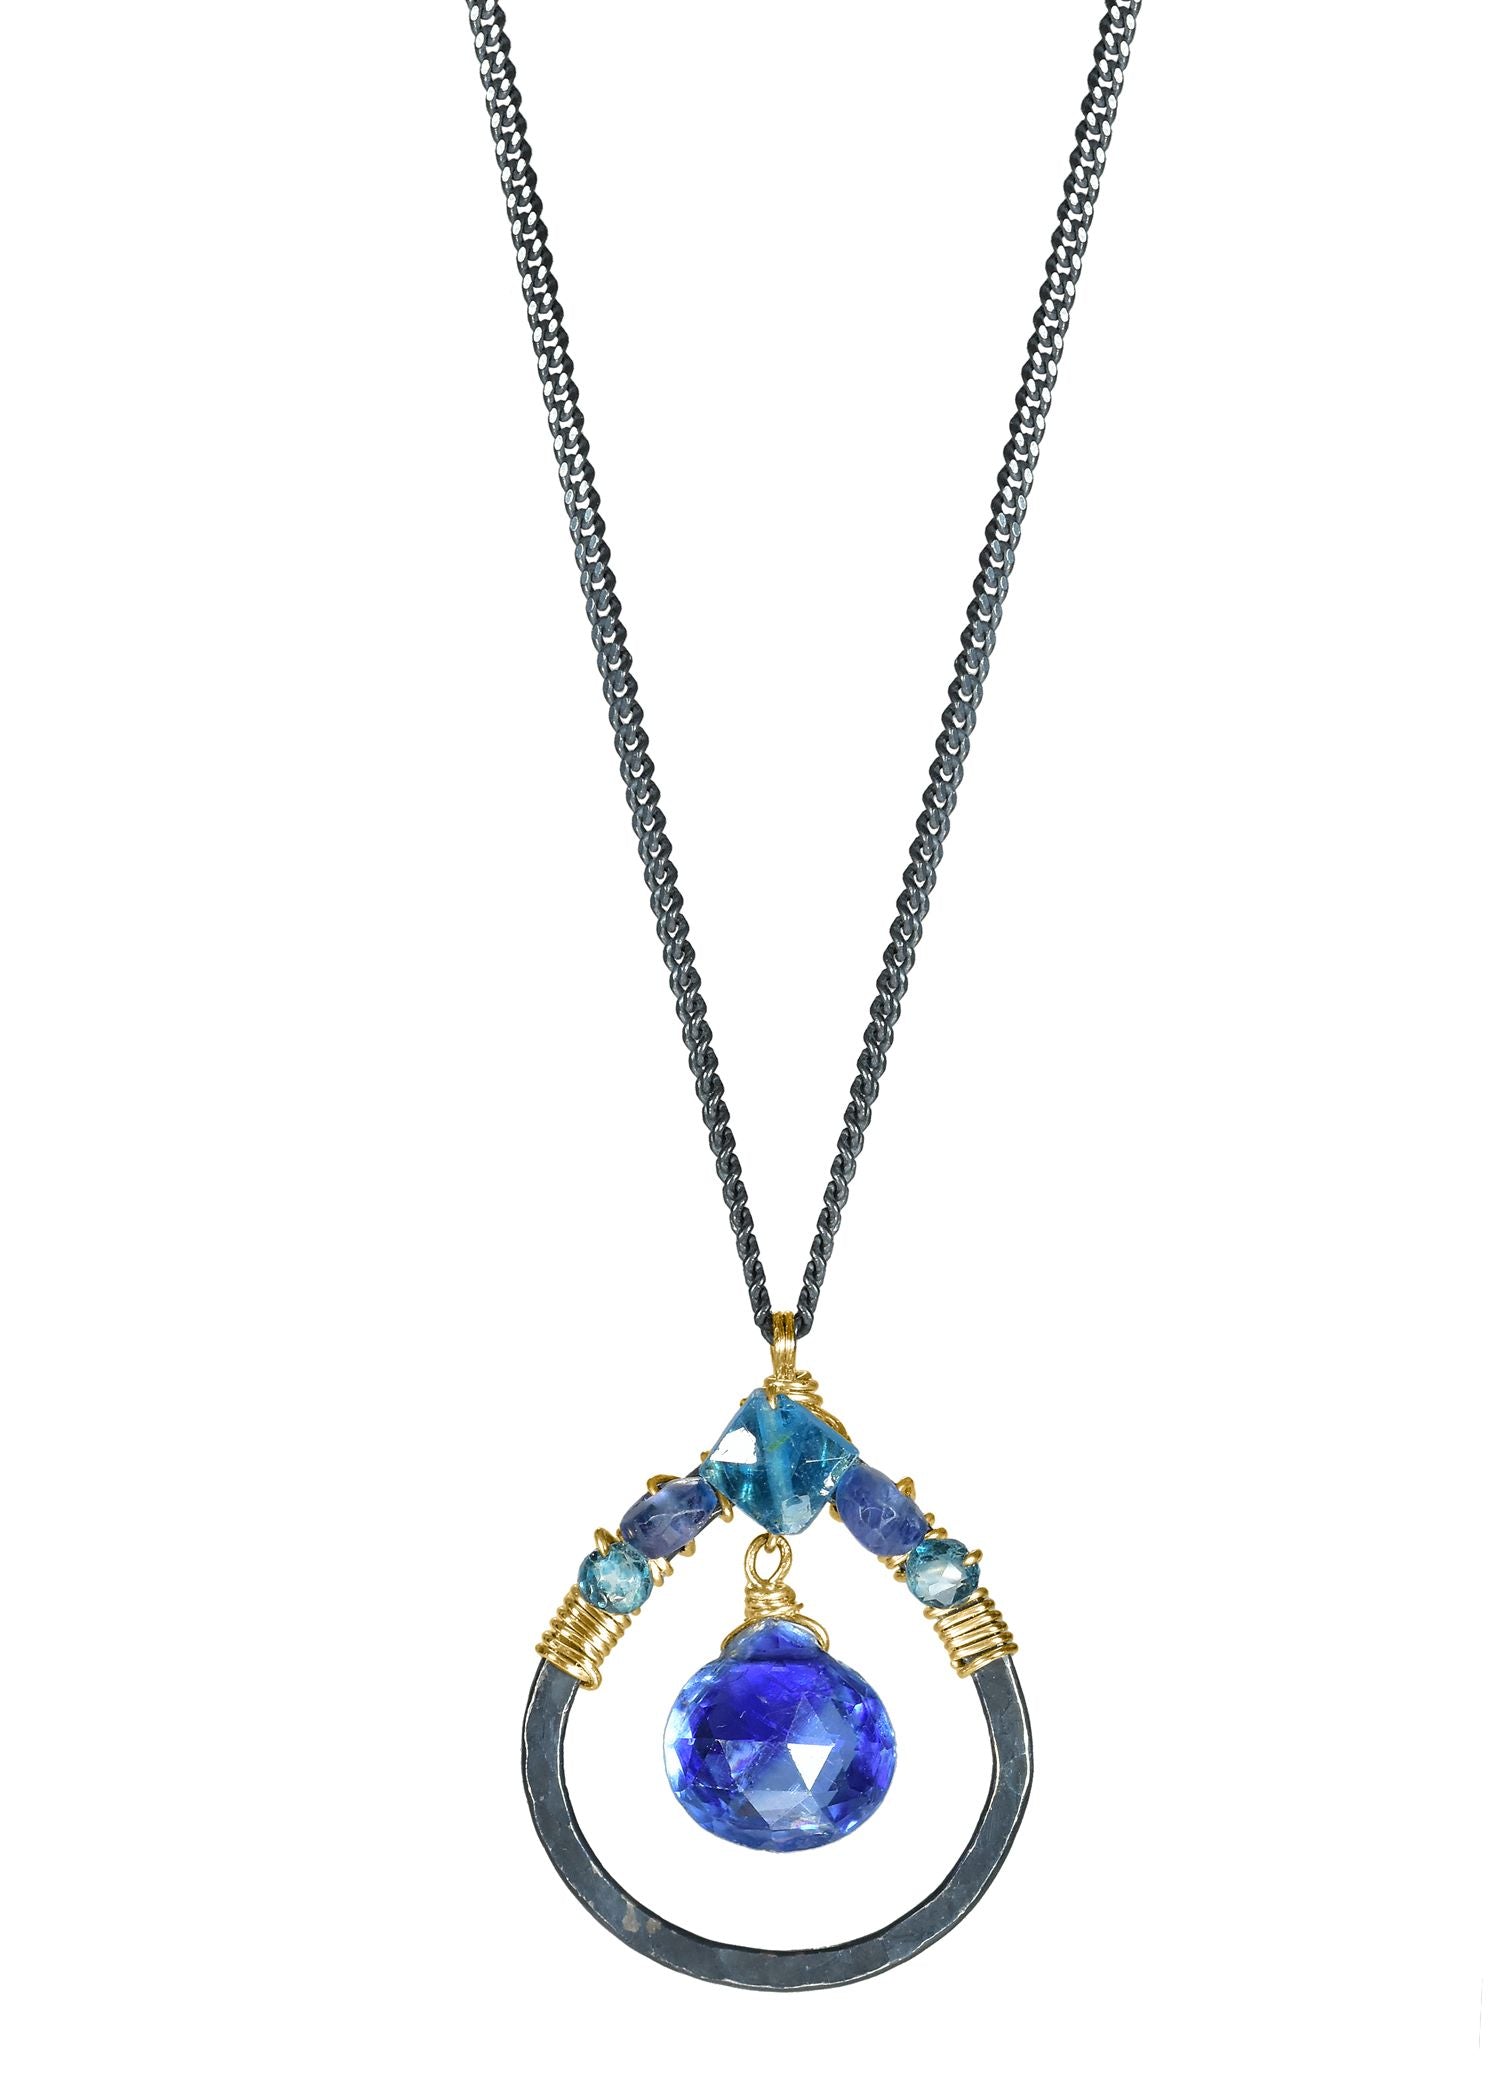 Kyanite London blue topaz Blue quartz 14k gold fill Blackened sterling silver Mixed metal Necklace measures 16” in length Pendant measures 11/16” in length and 9/16” in width Handmade in our Los Angeles studio